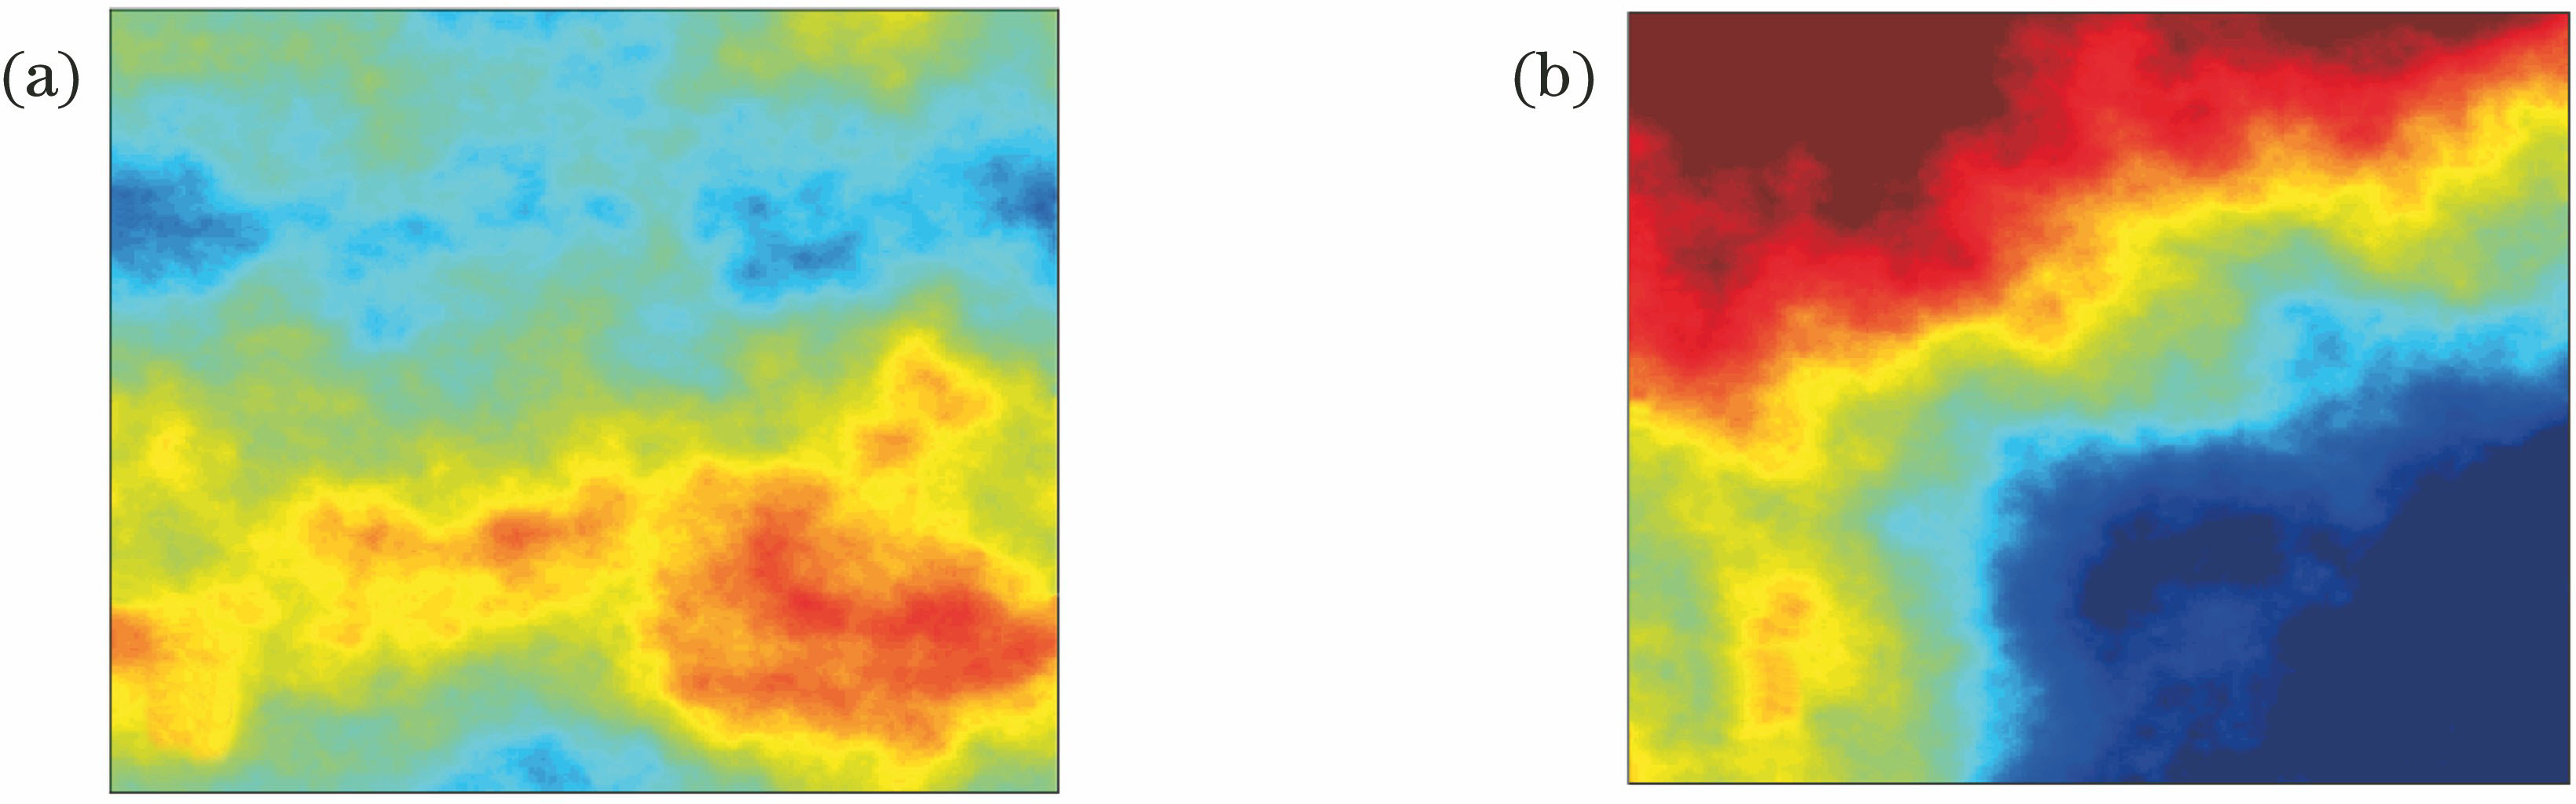 Simulation results of turbulence phase screen. (a) Before compensation; (b) after compensation